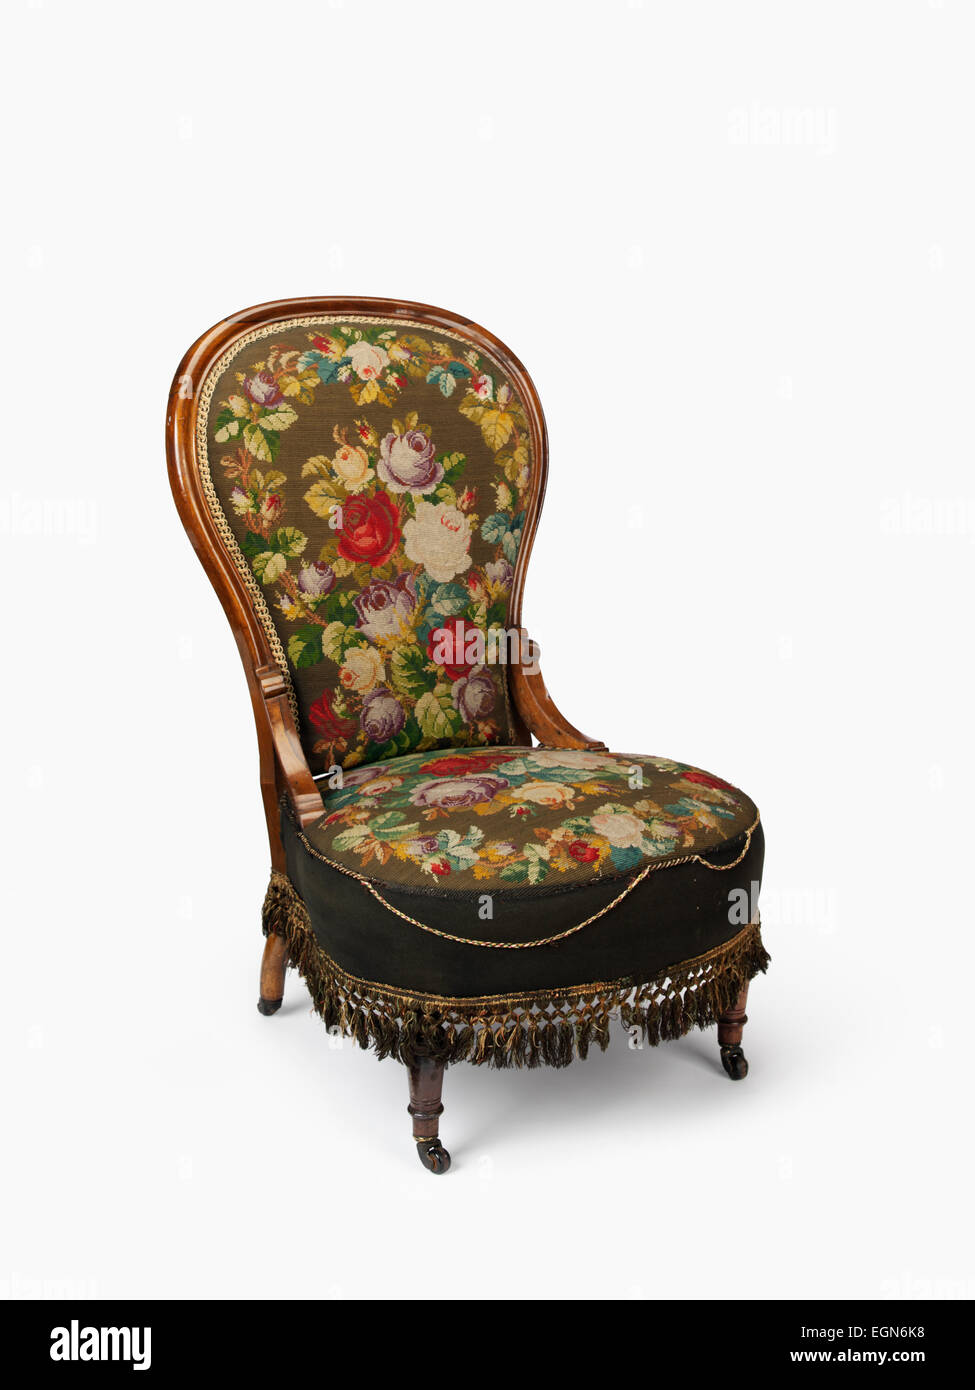 Upholstered chair with wooden frame Stock Photo